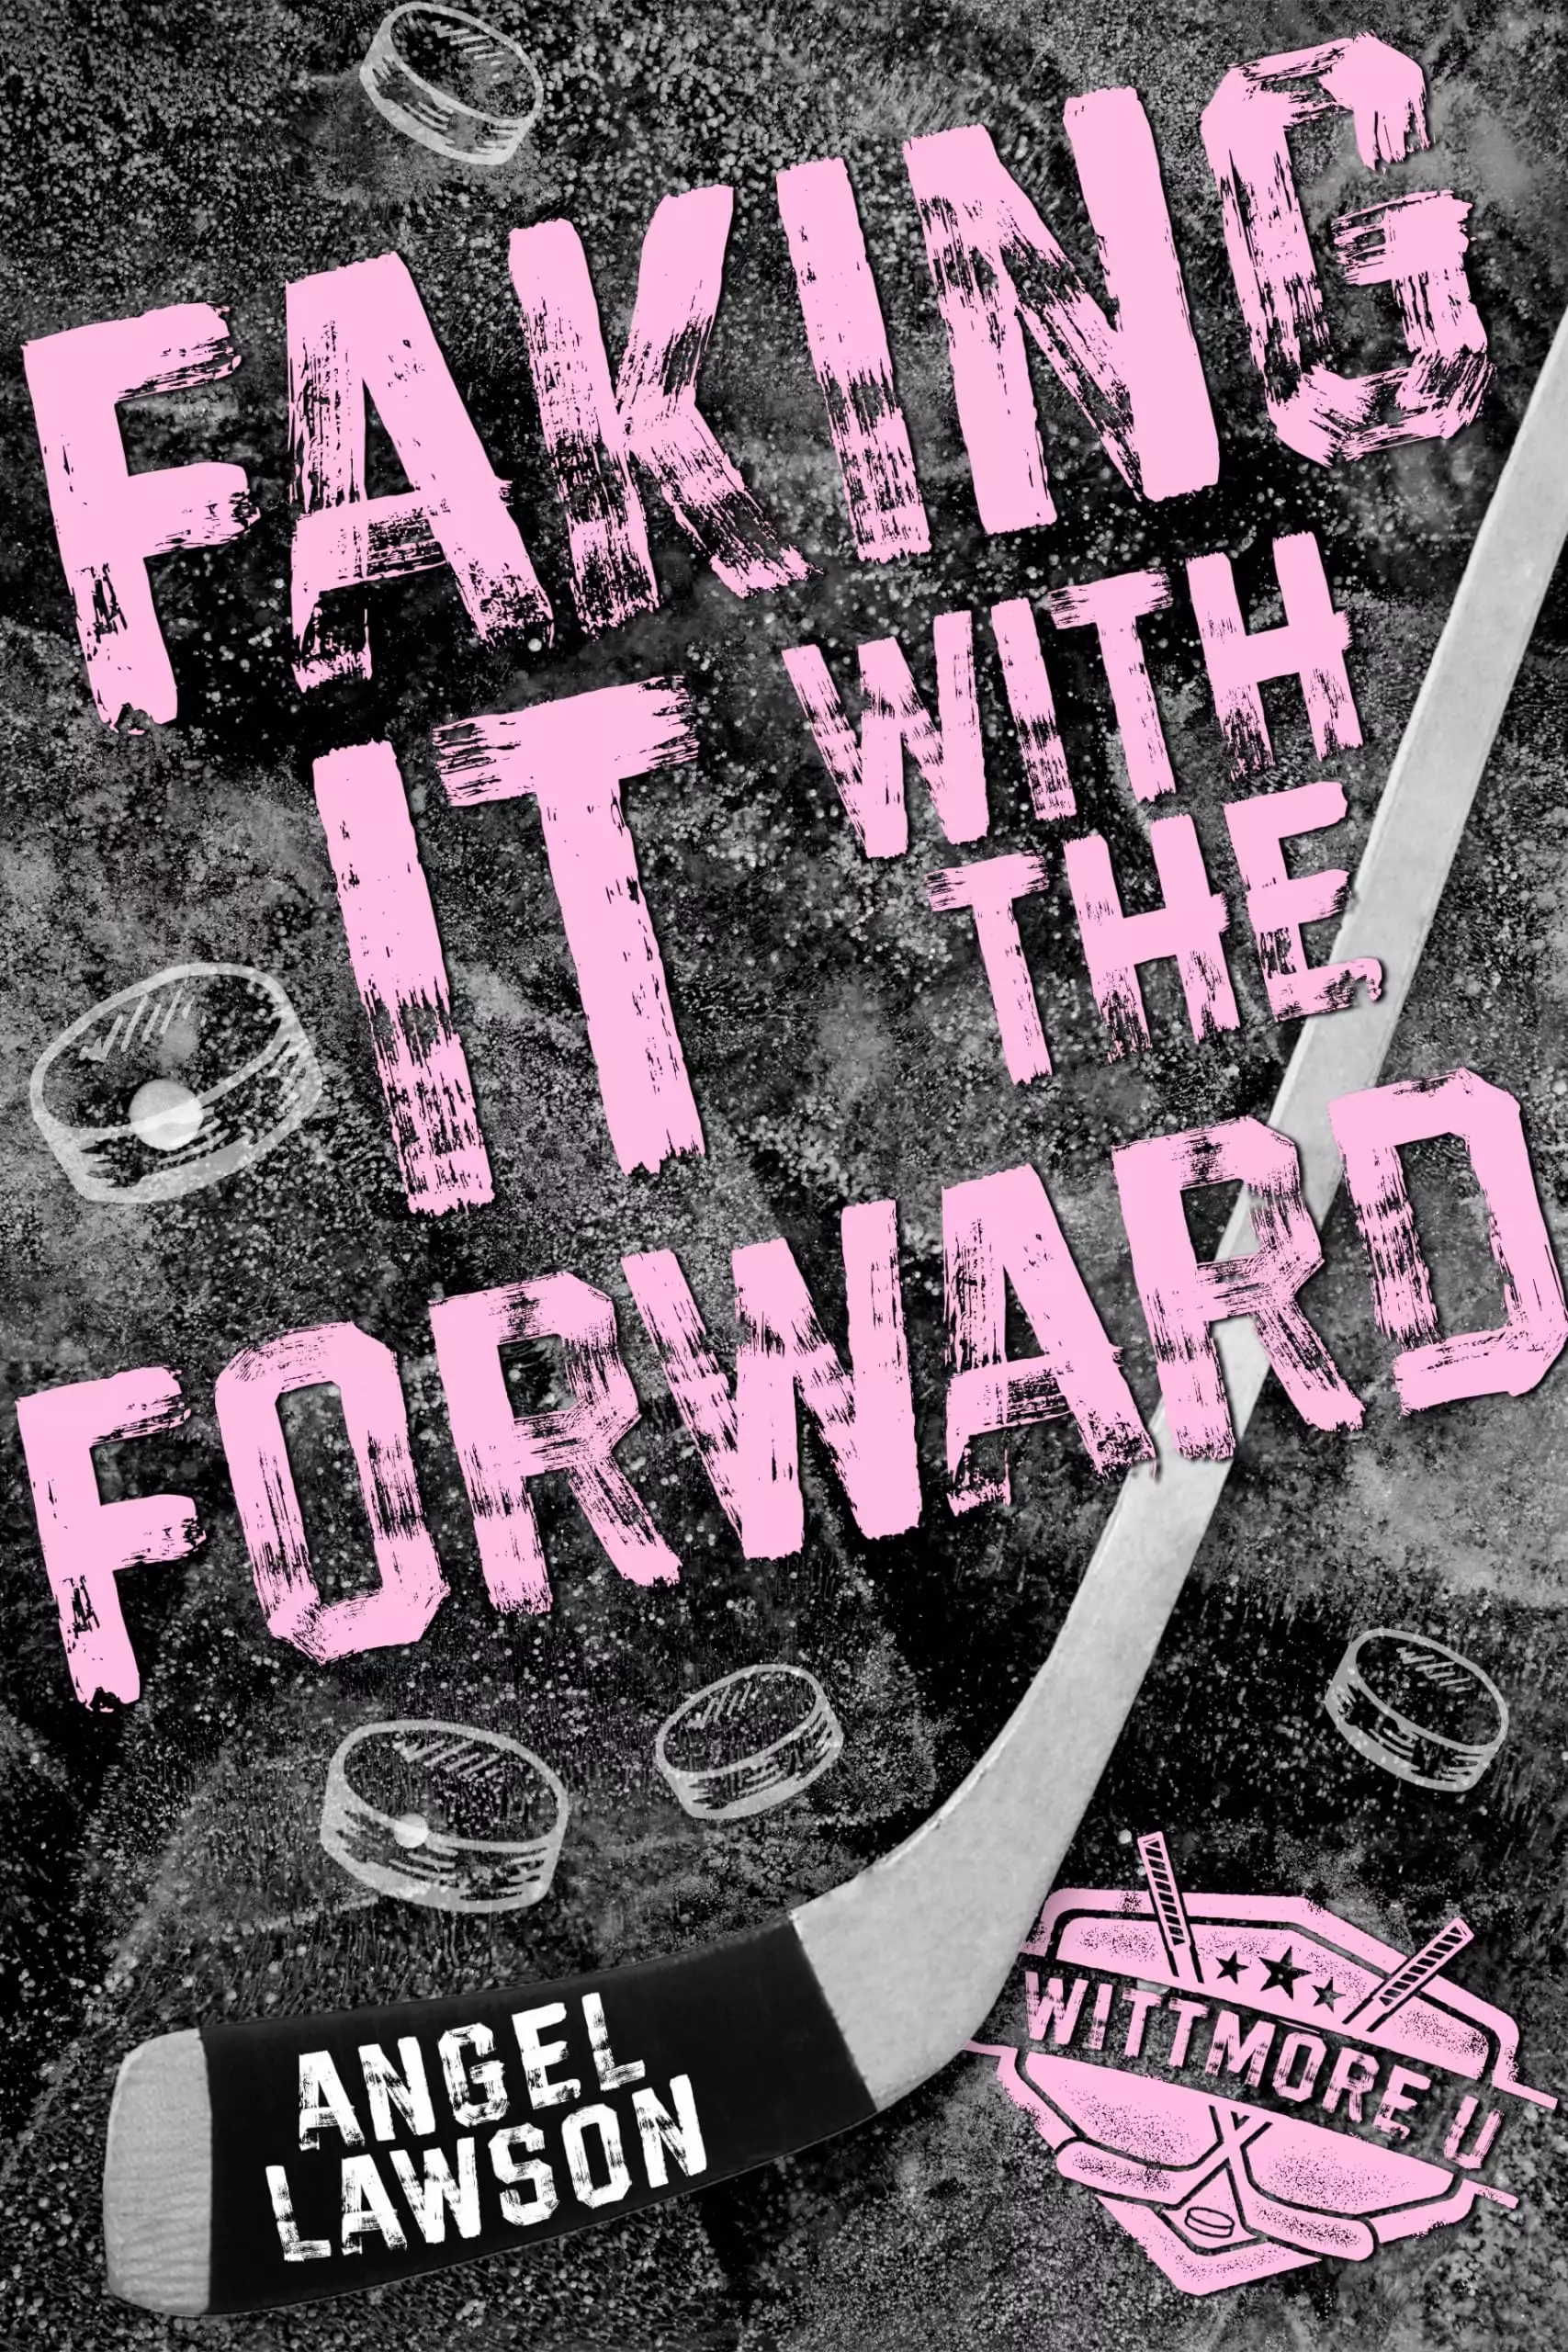 Faking It with the Forward: Wittmore U Hockey